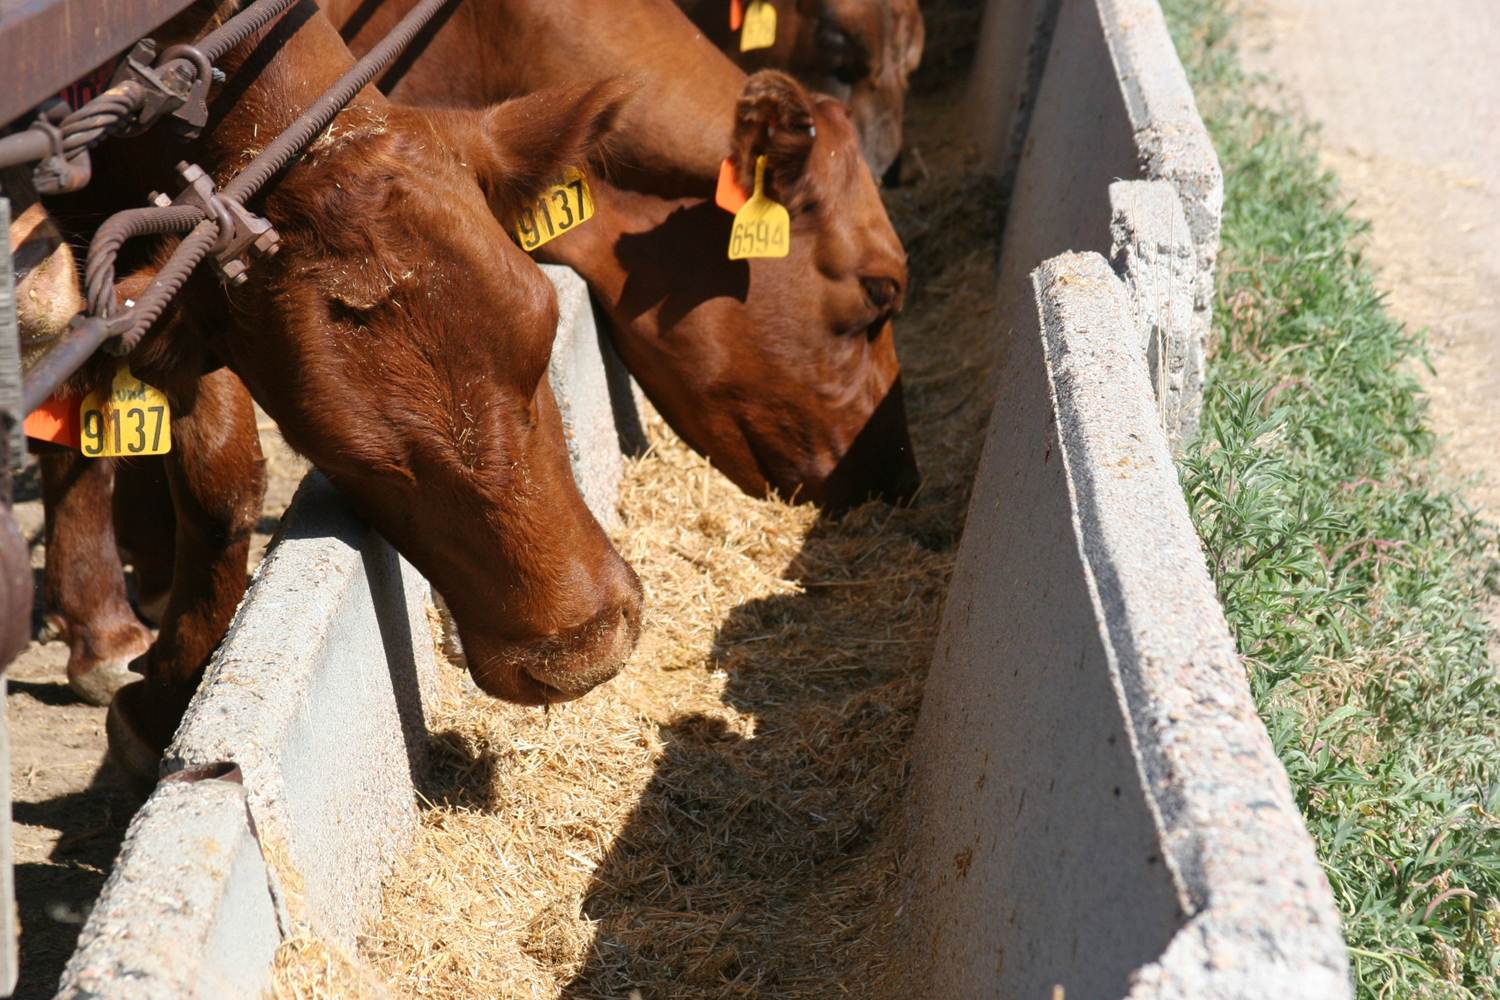 Dry lot feeding of summer calving cows may be a cost competitive production system when grass prices are high, distillers grains prices are comparatively low, and corn stalks are readily available for grazing. Photo courtesy of Aaron Berger.